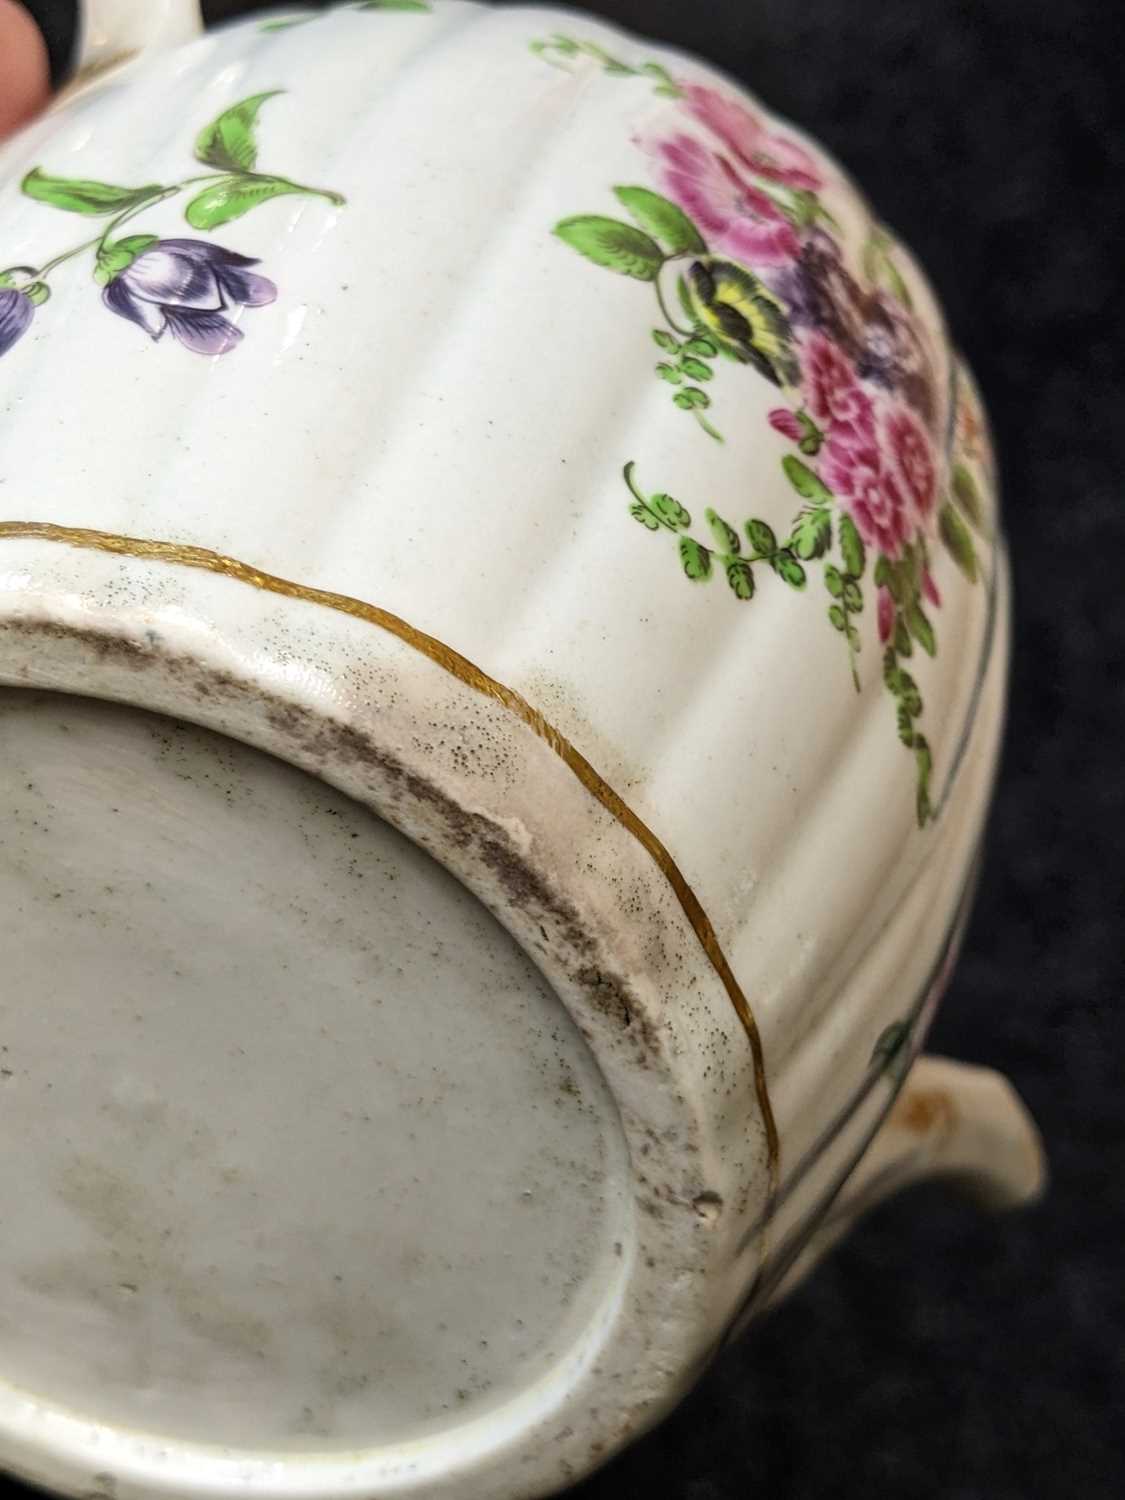 WORCESTER PORCELAIN TEAPOT & COVER, c. 1775, reeded barrel form with ear shaped handle, the cover - Image 6 of 7